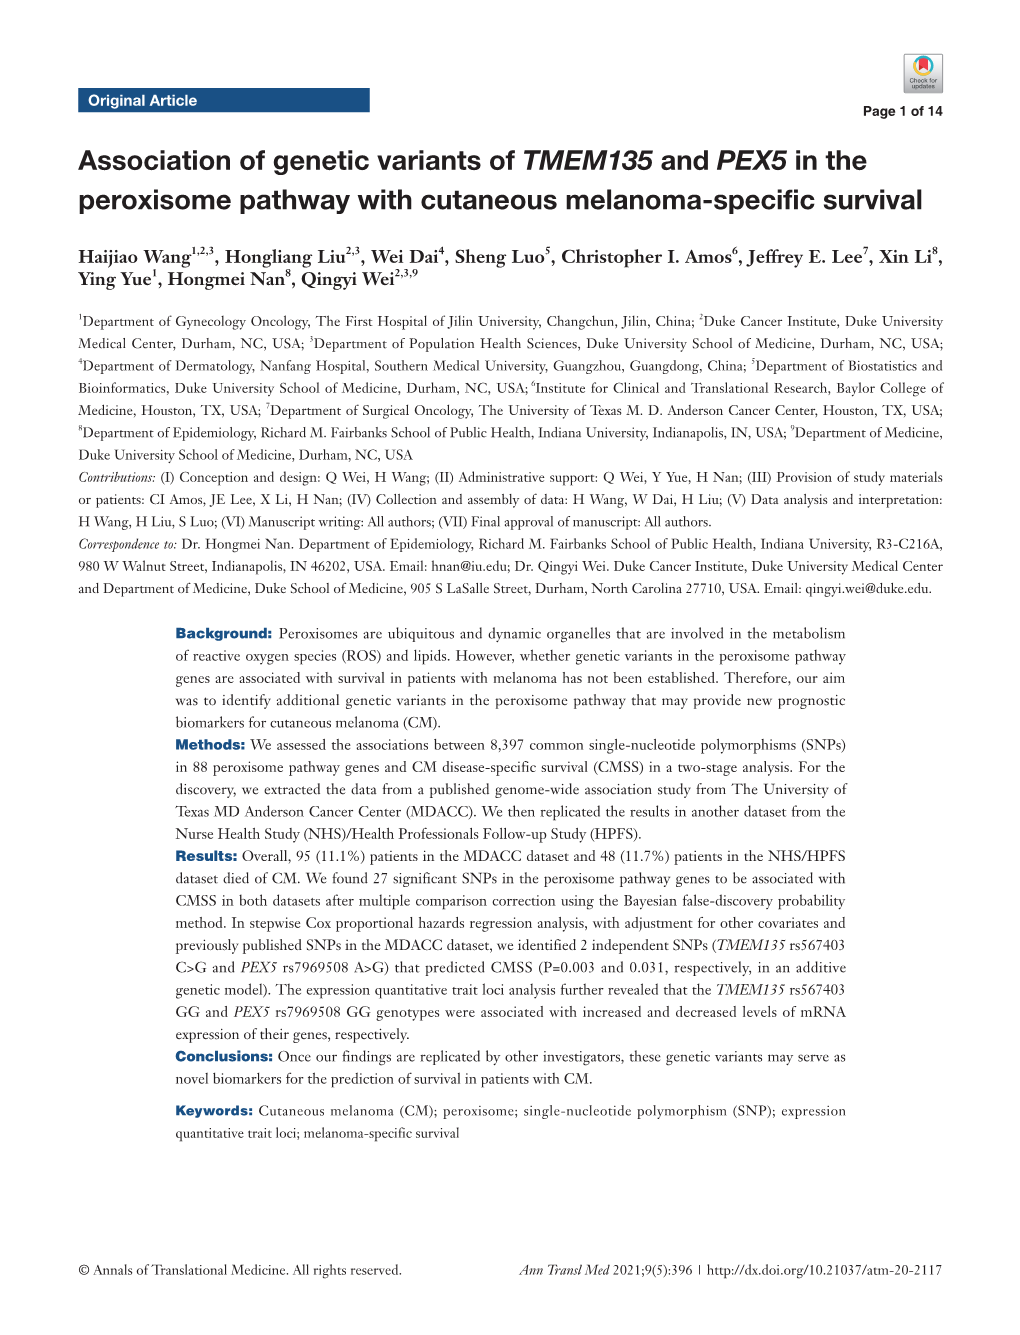 Association of Genetic Variants of TMEM135 and PEX5 in the Peroxisome Pathway with Cutaneous Melanoma-Specific Survival